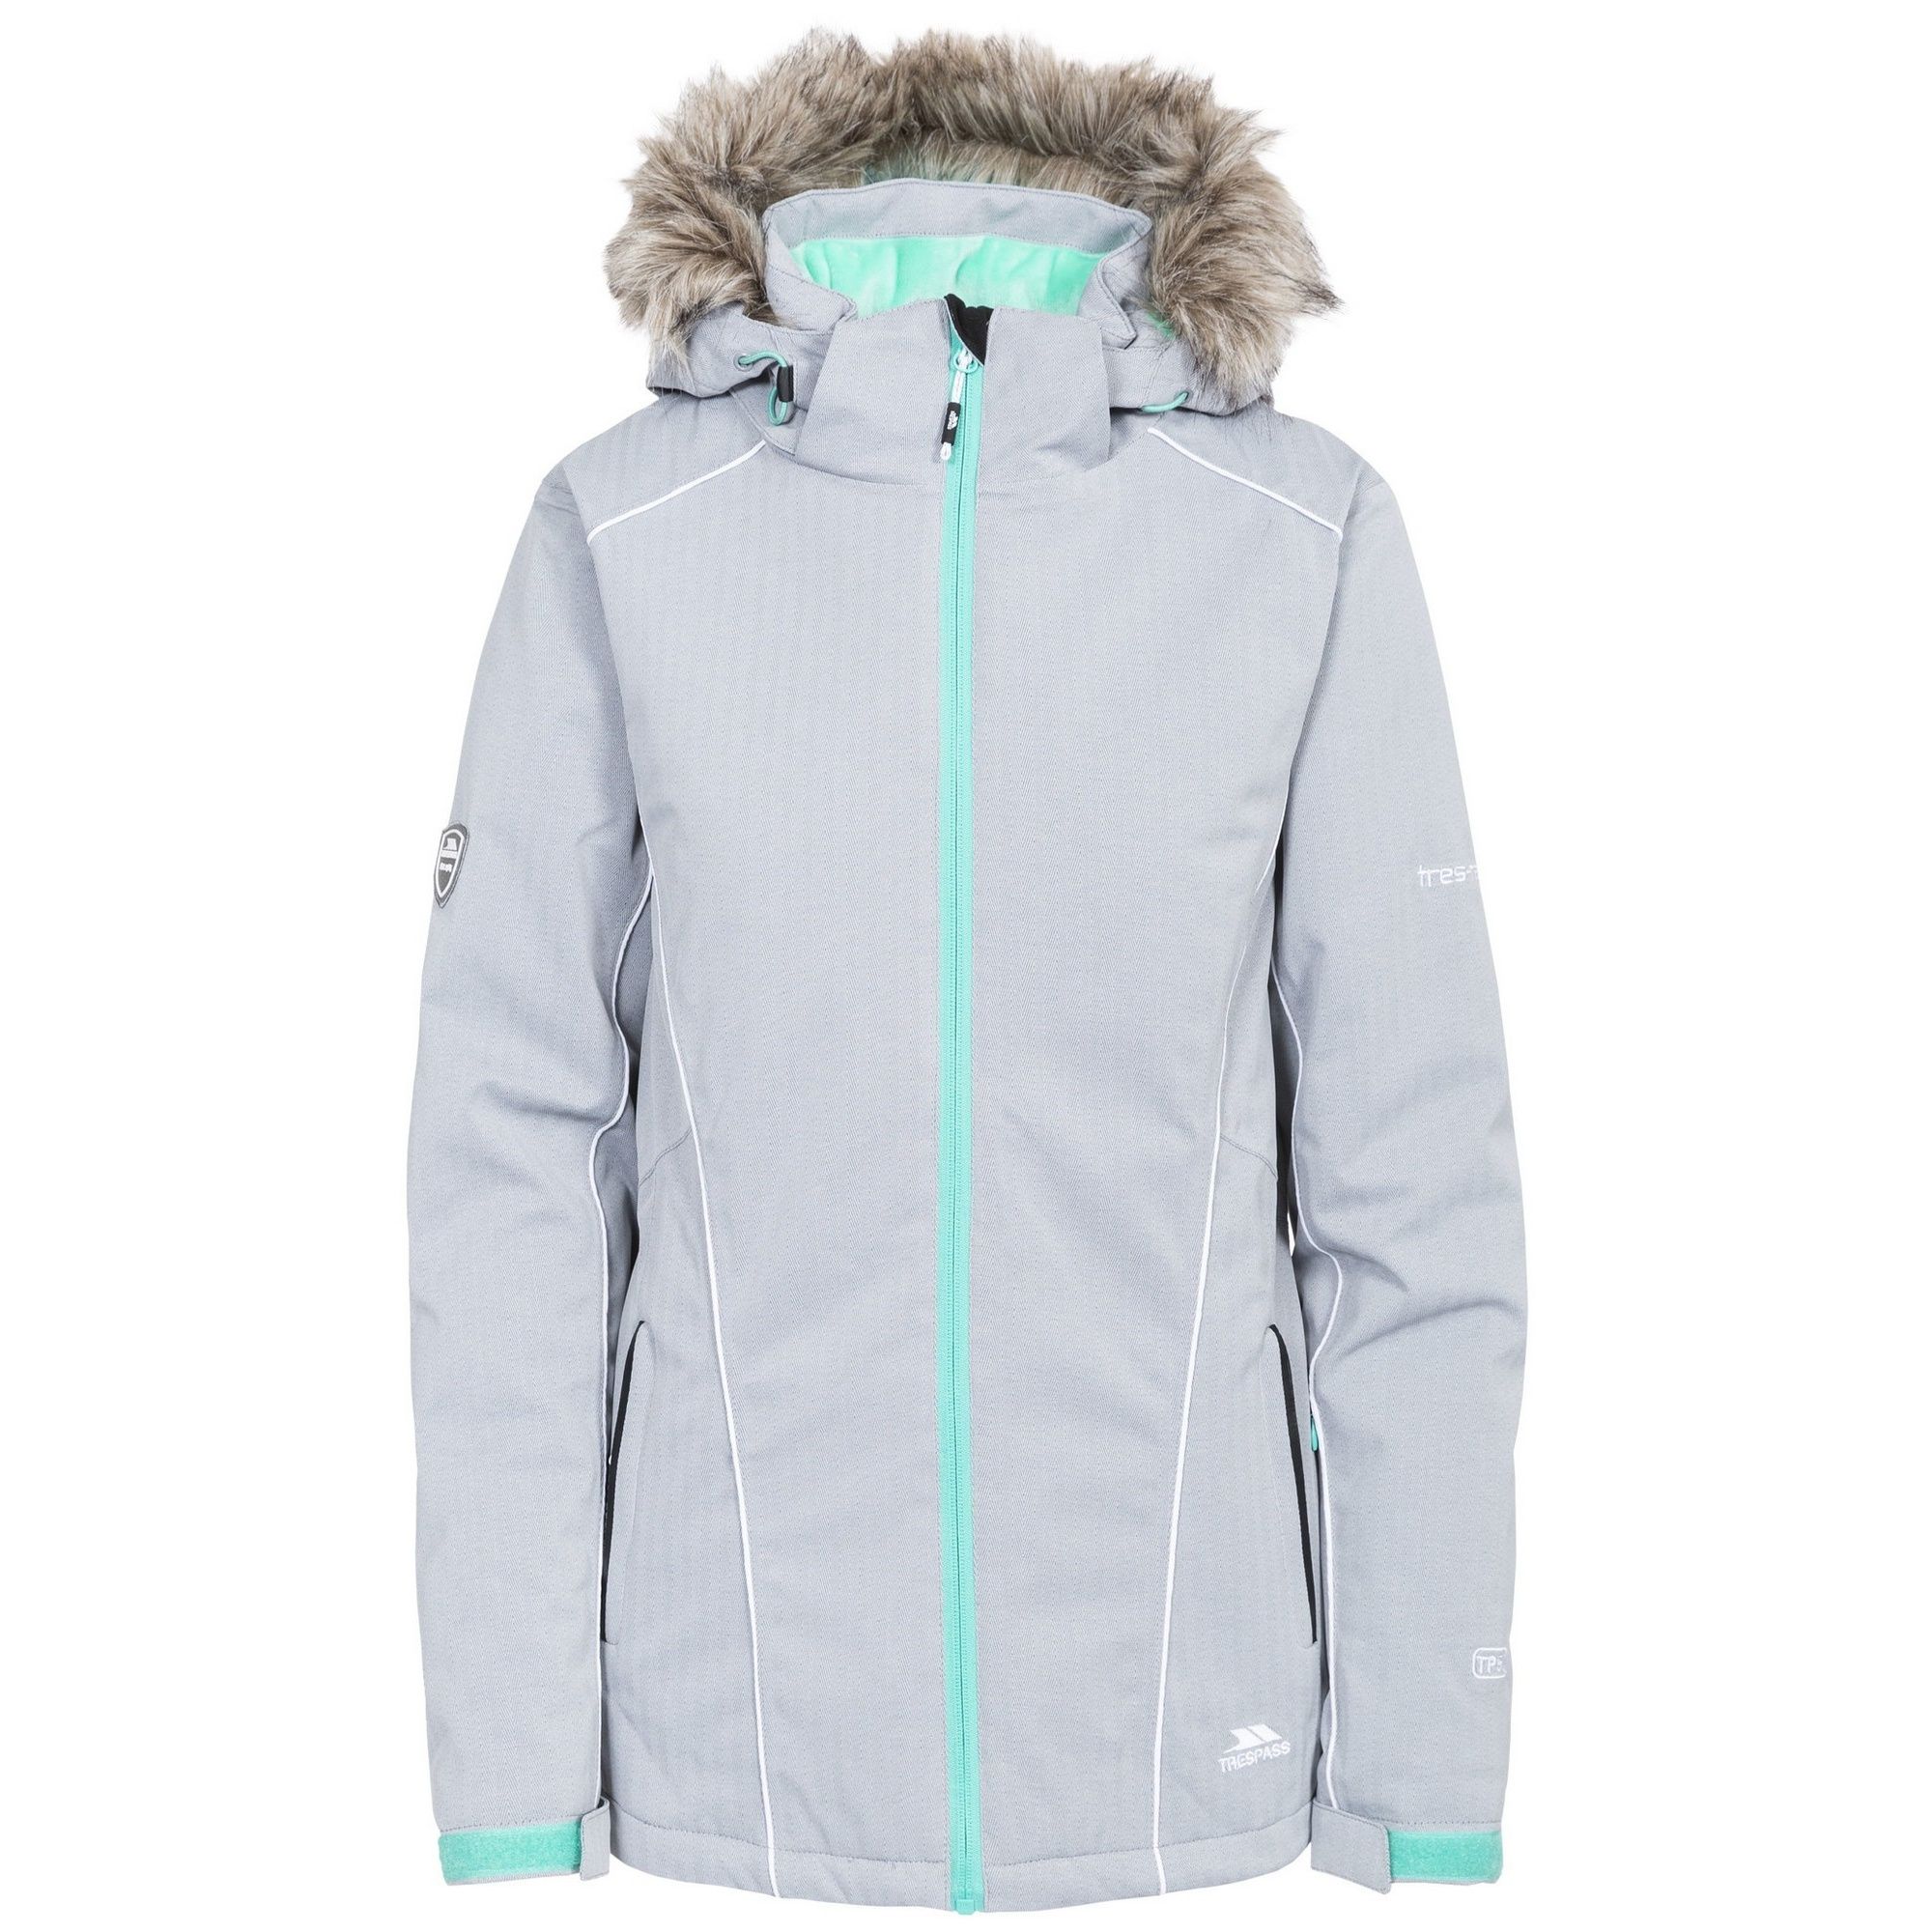 100% polyester. Womens ski jacket with faux fur lined hood. Touch fastening sleeves. 2 x front pockets. Full zip. Ideal for skiing.